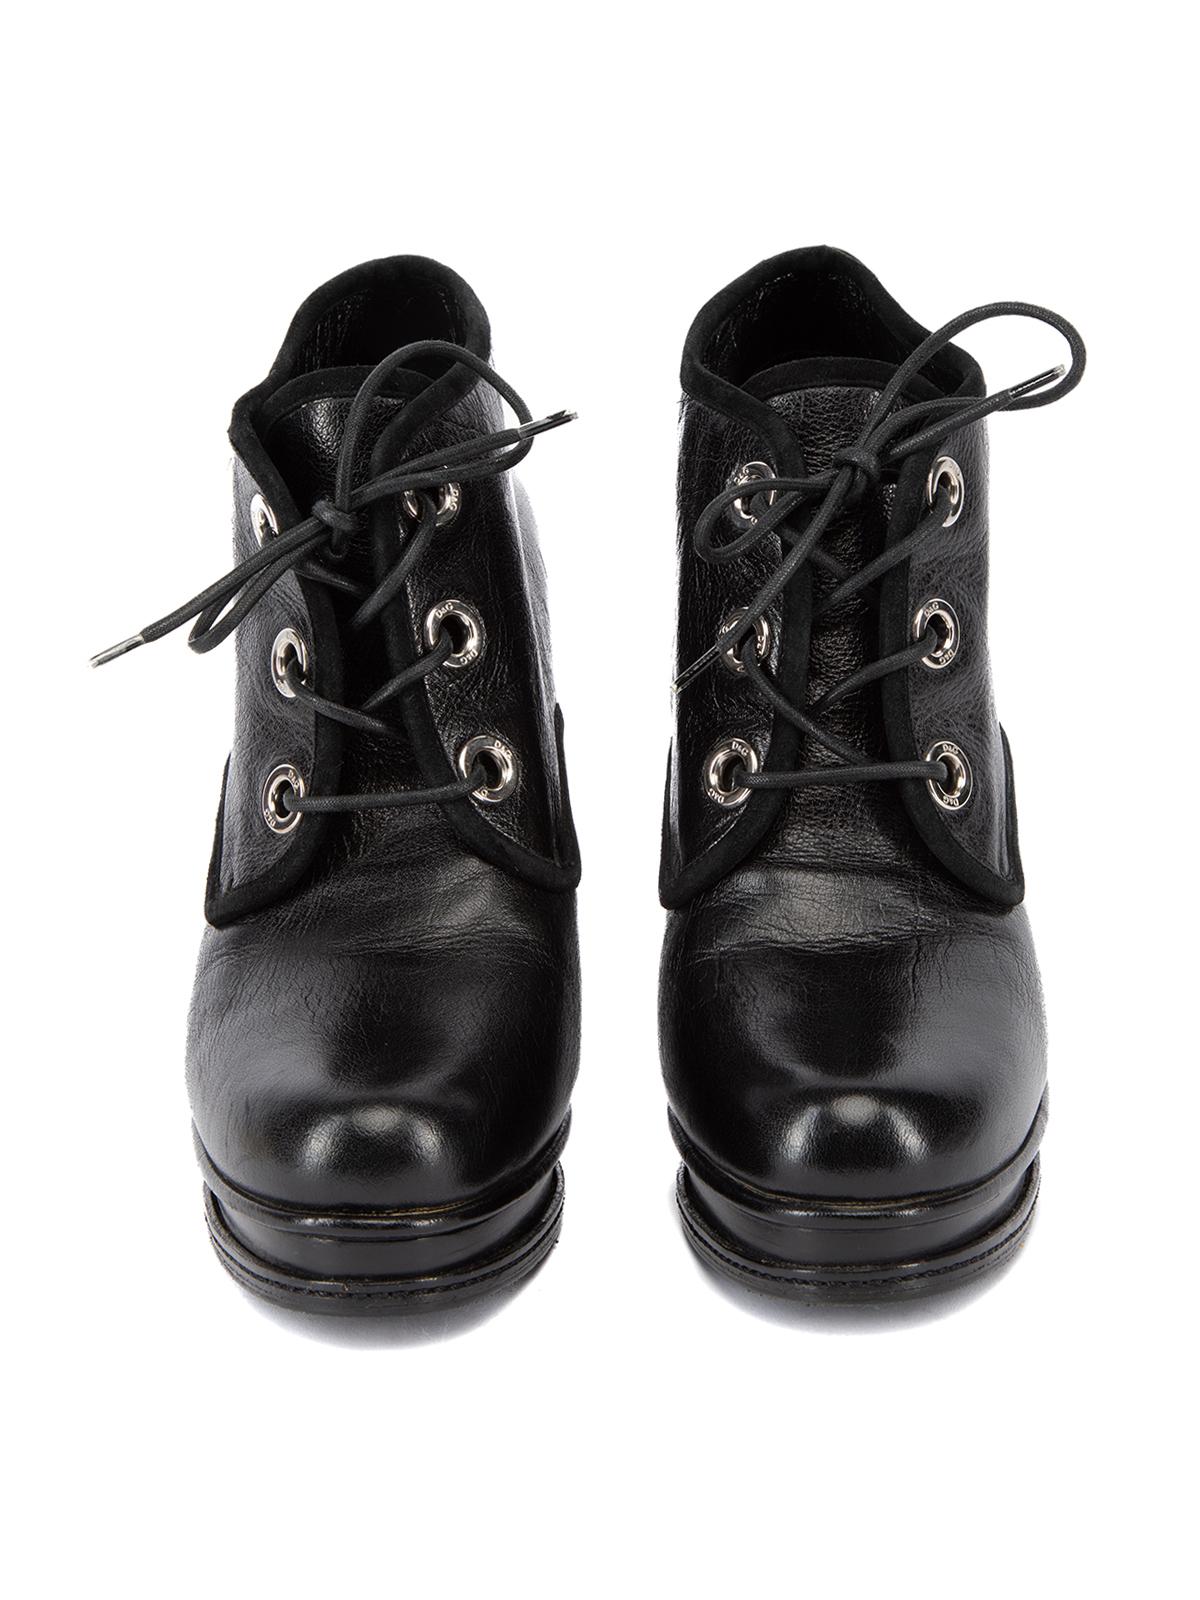 Pre-Loved Dolce & Gabbana Women's Black Eyelet Lace Up Platform Heeled Boots In Excellent Condition In London, GB